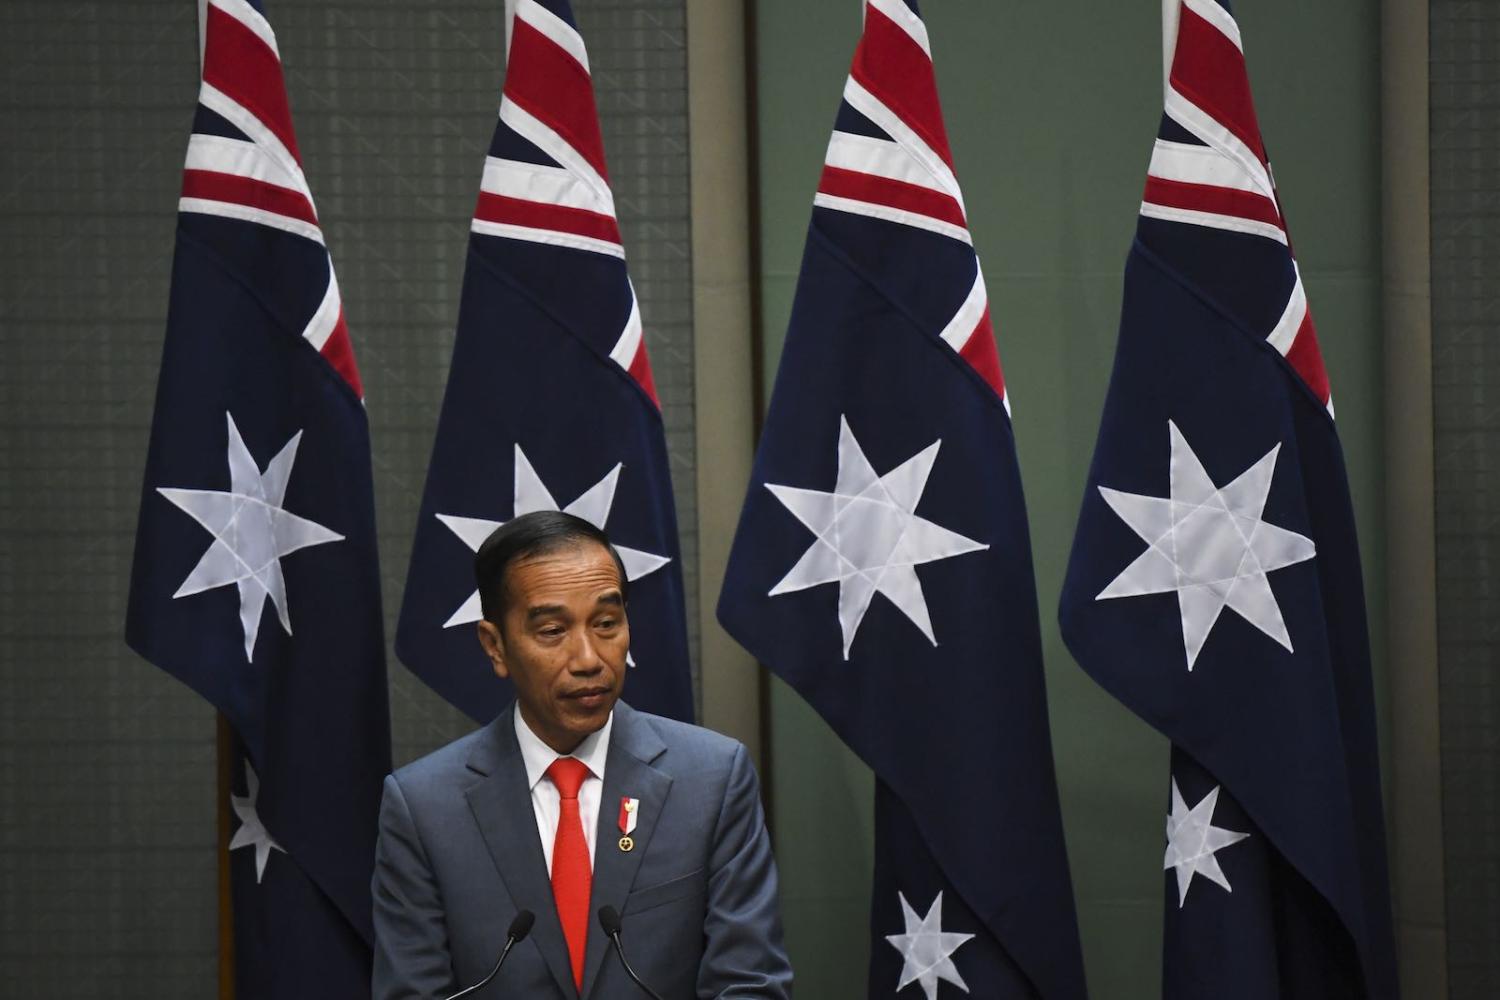 Indonesian President Joko Widodo addresses parliament, 10 February in Canberra (Photo: Lukas Coch via Getty Images)